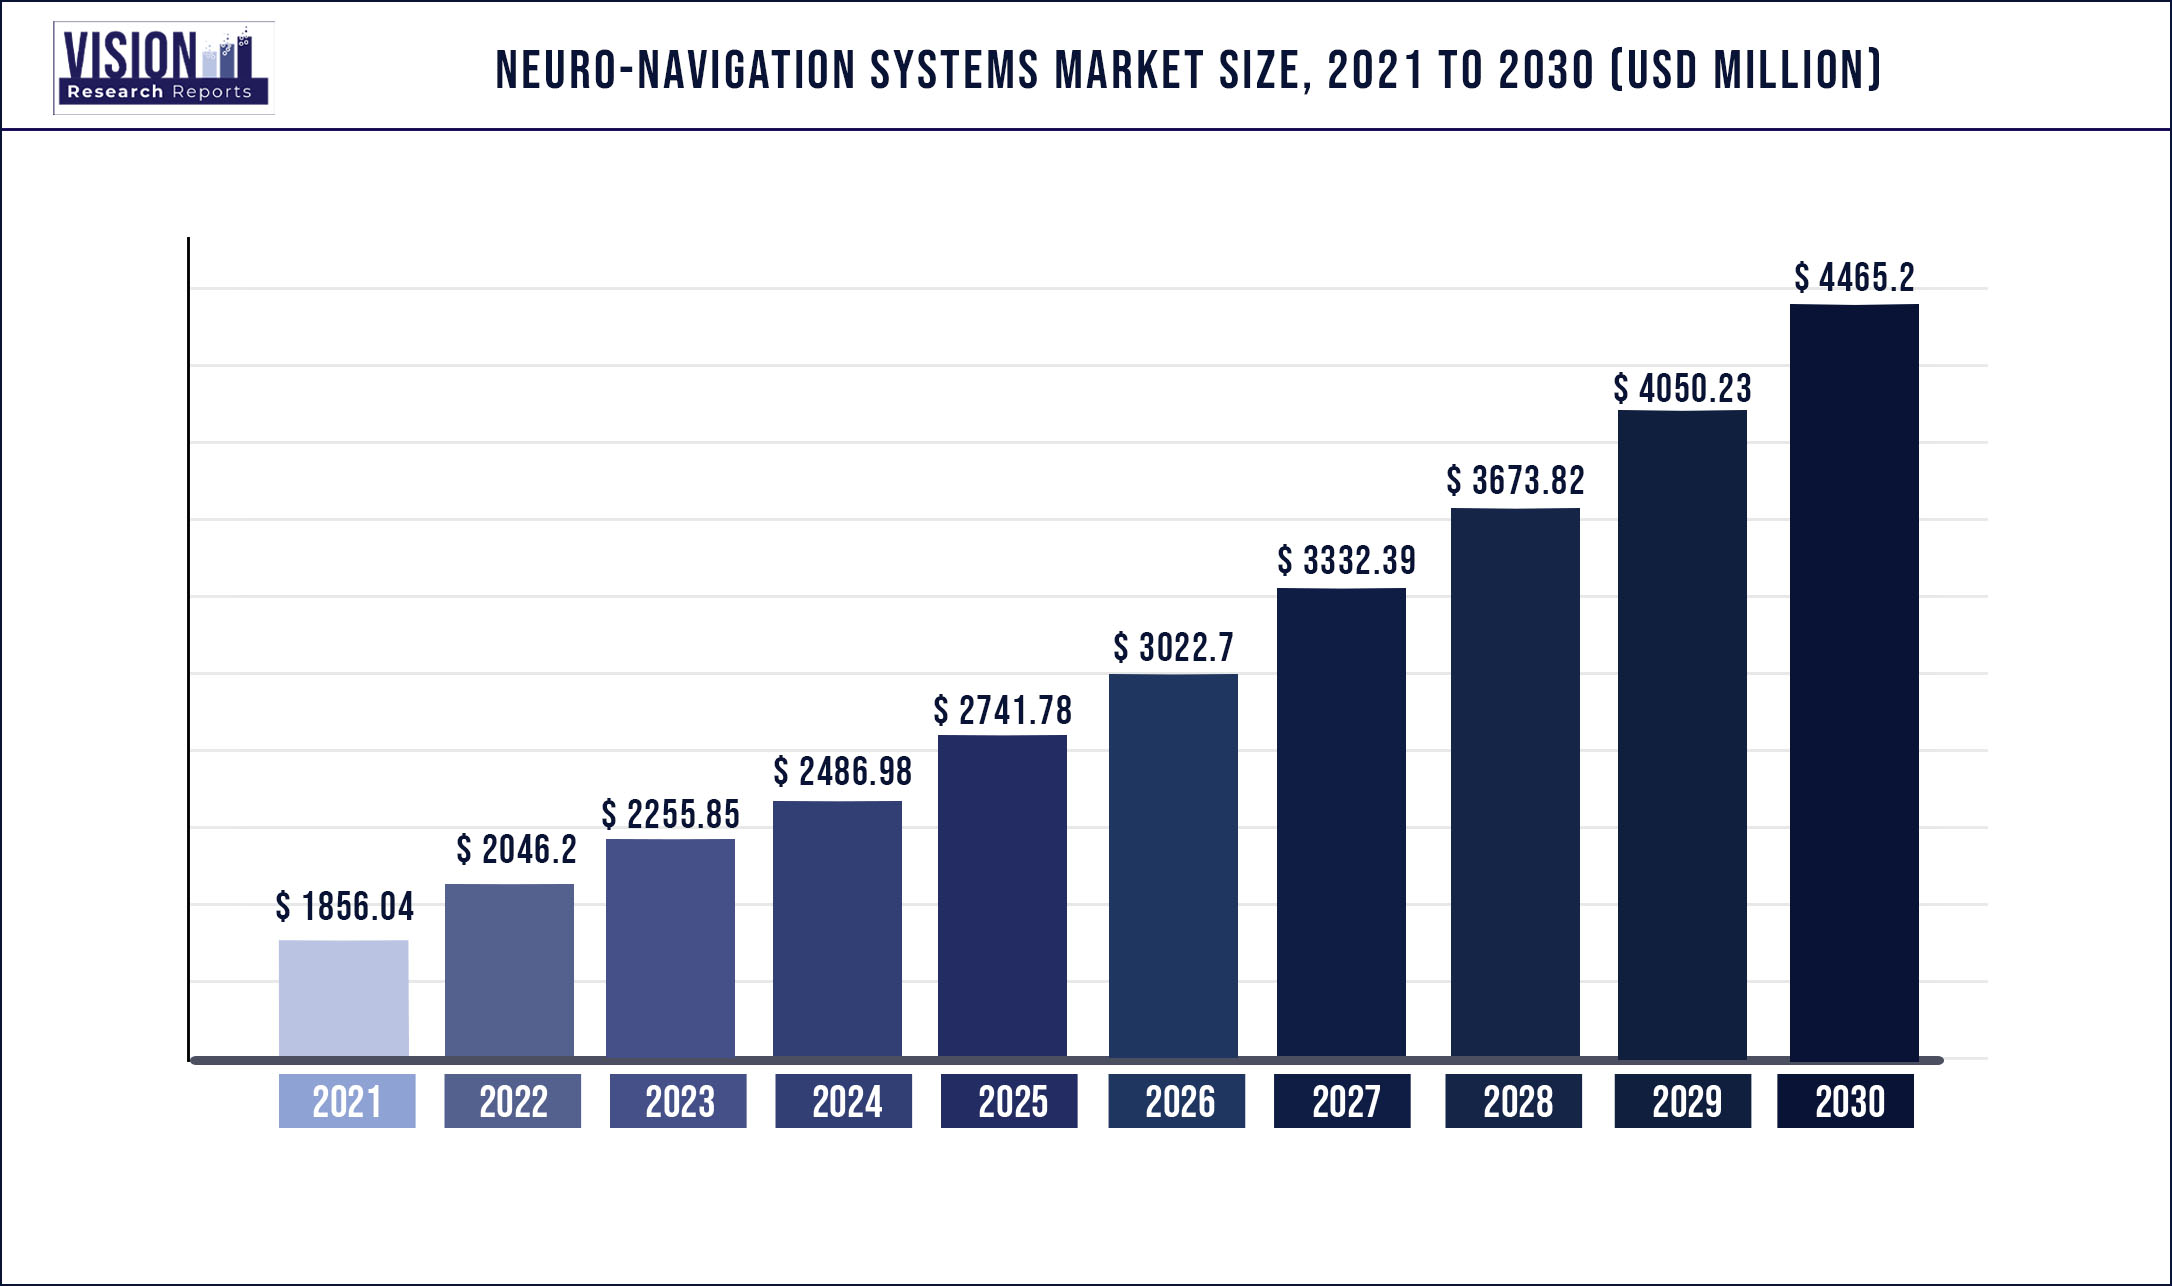 Neuro-navigation Systems Market Size 2021 to 2030